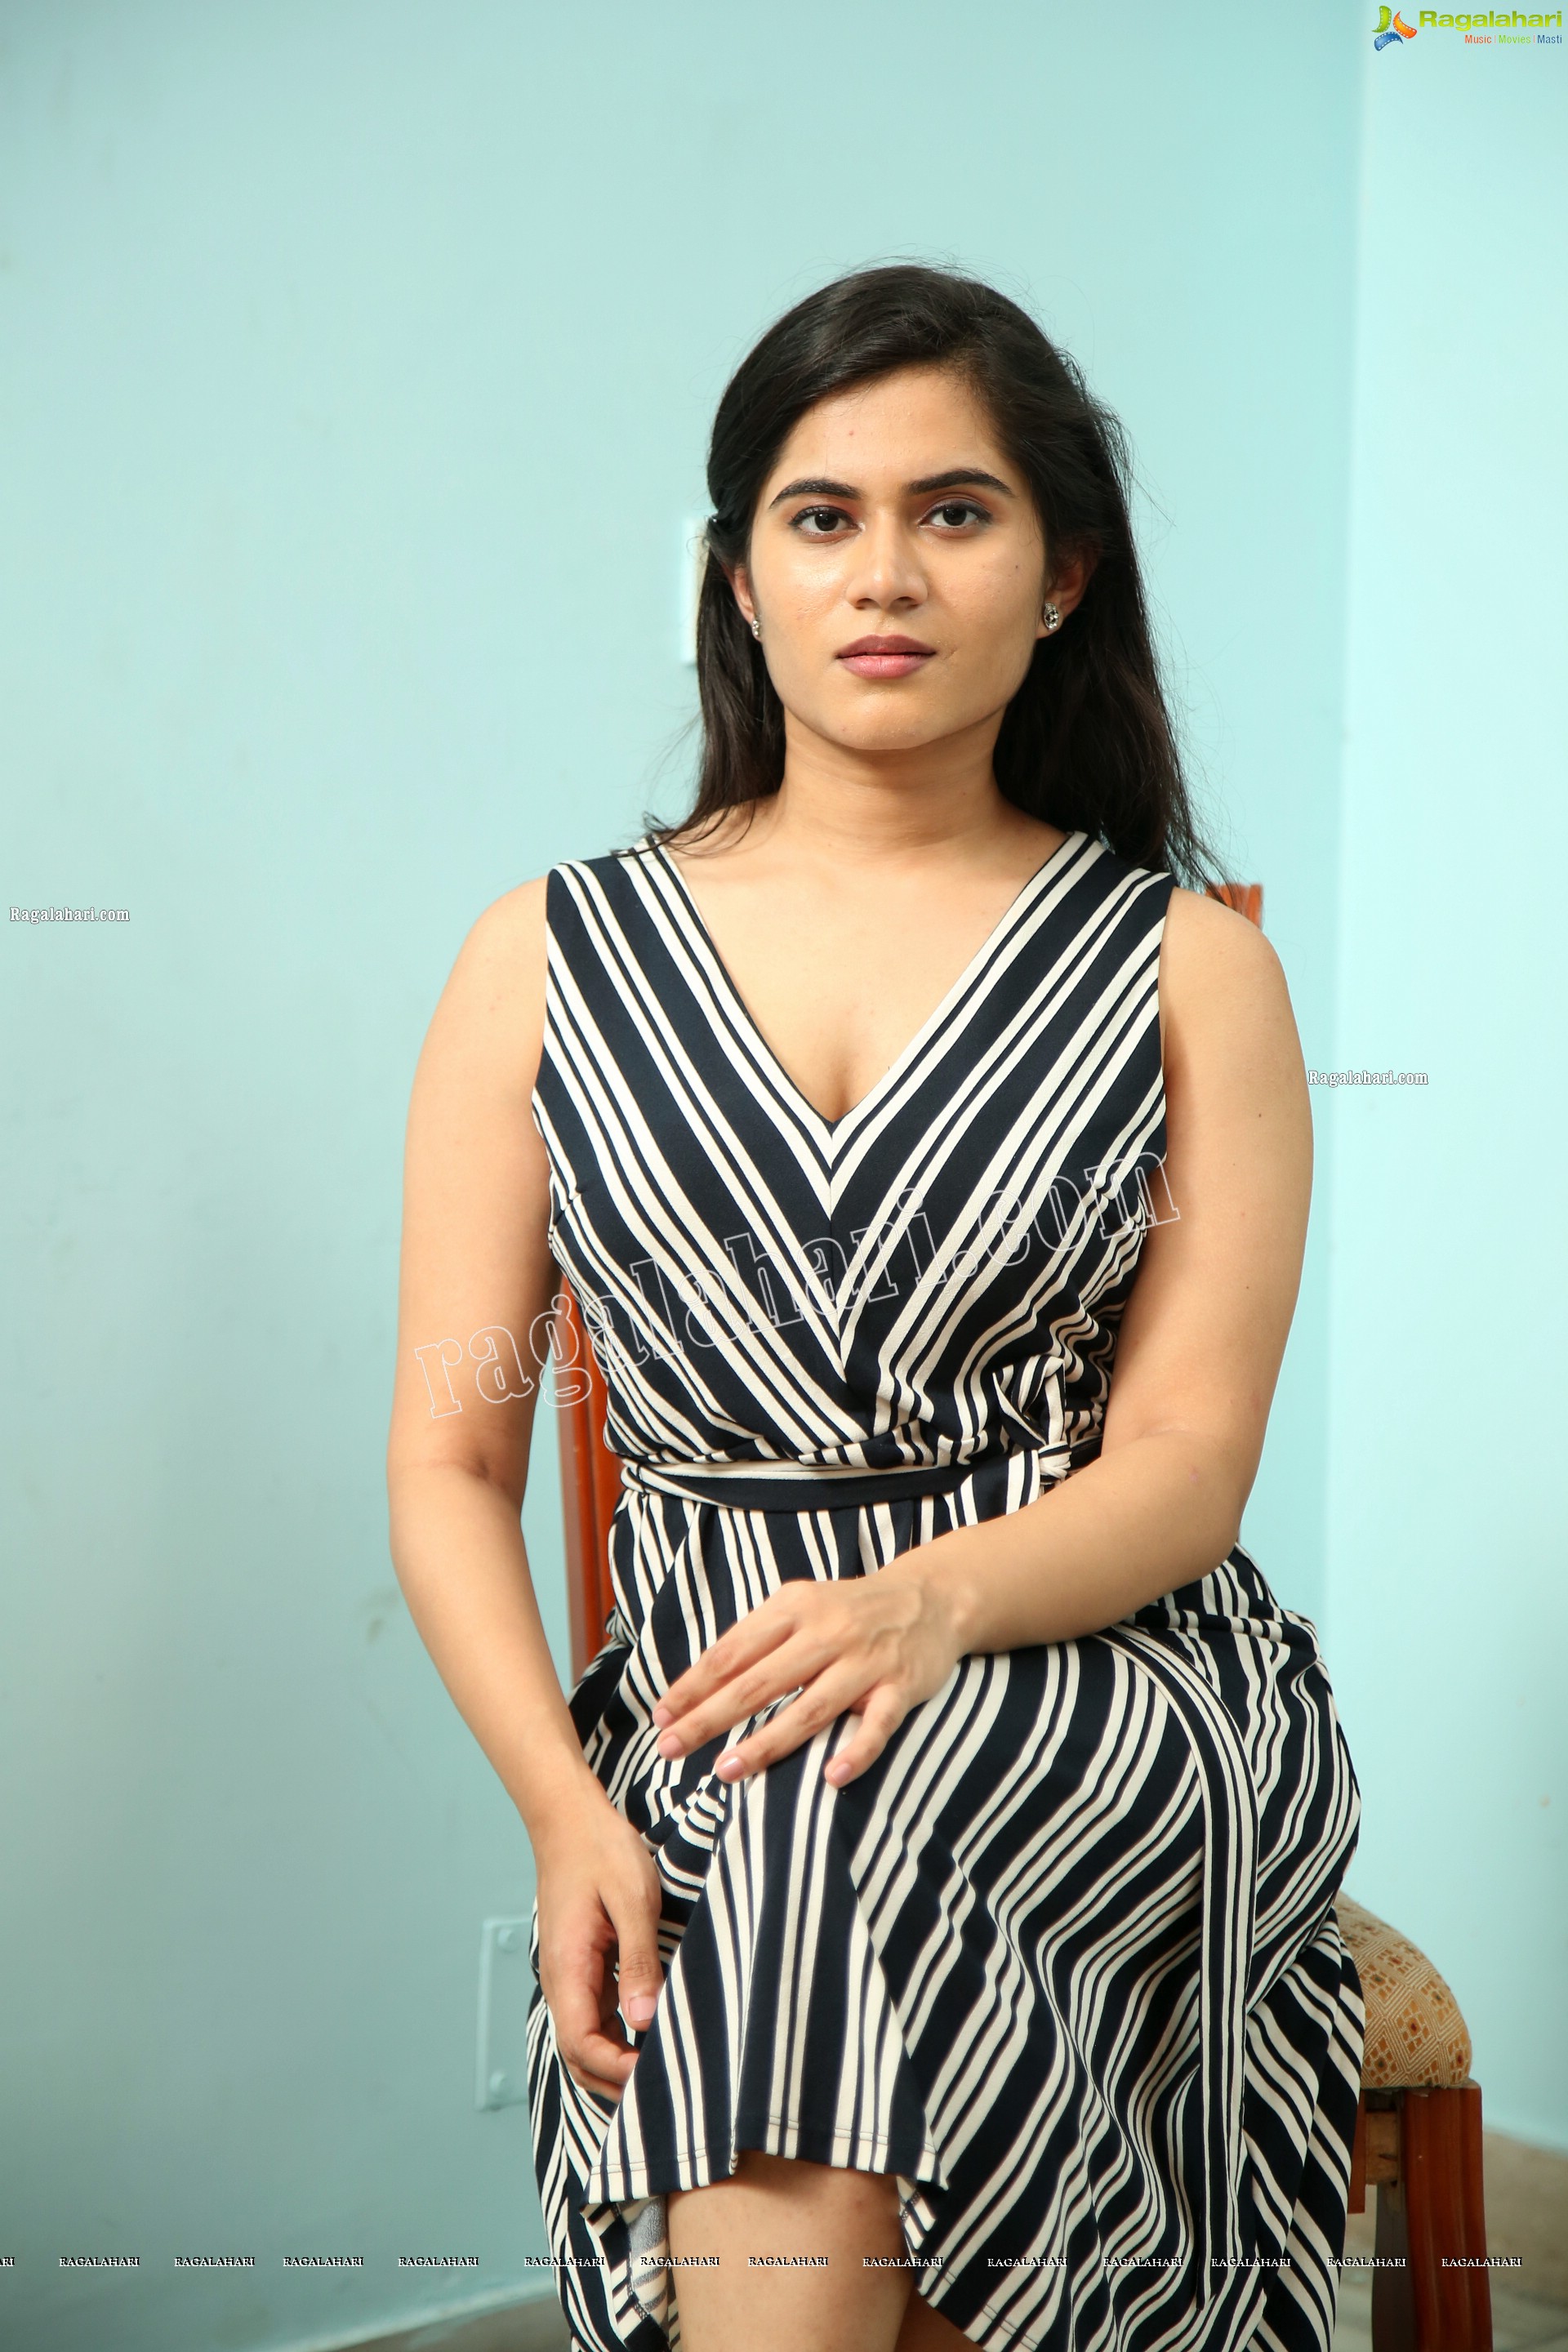 Tara Chowdary in Black and White Striped Dress, Exclusive Photo Shoot